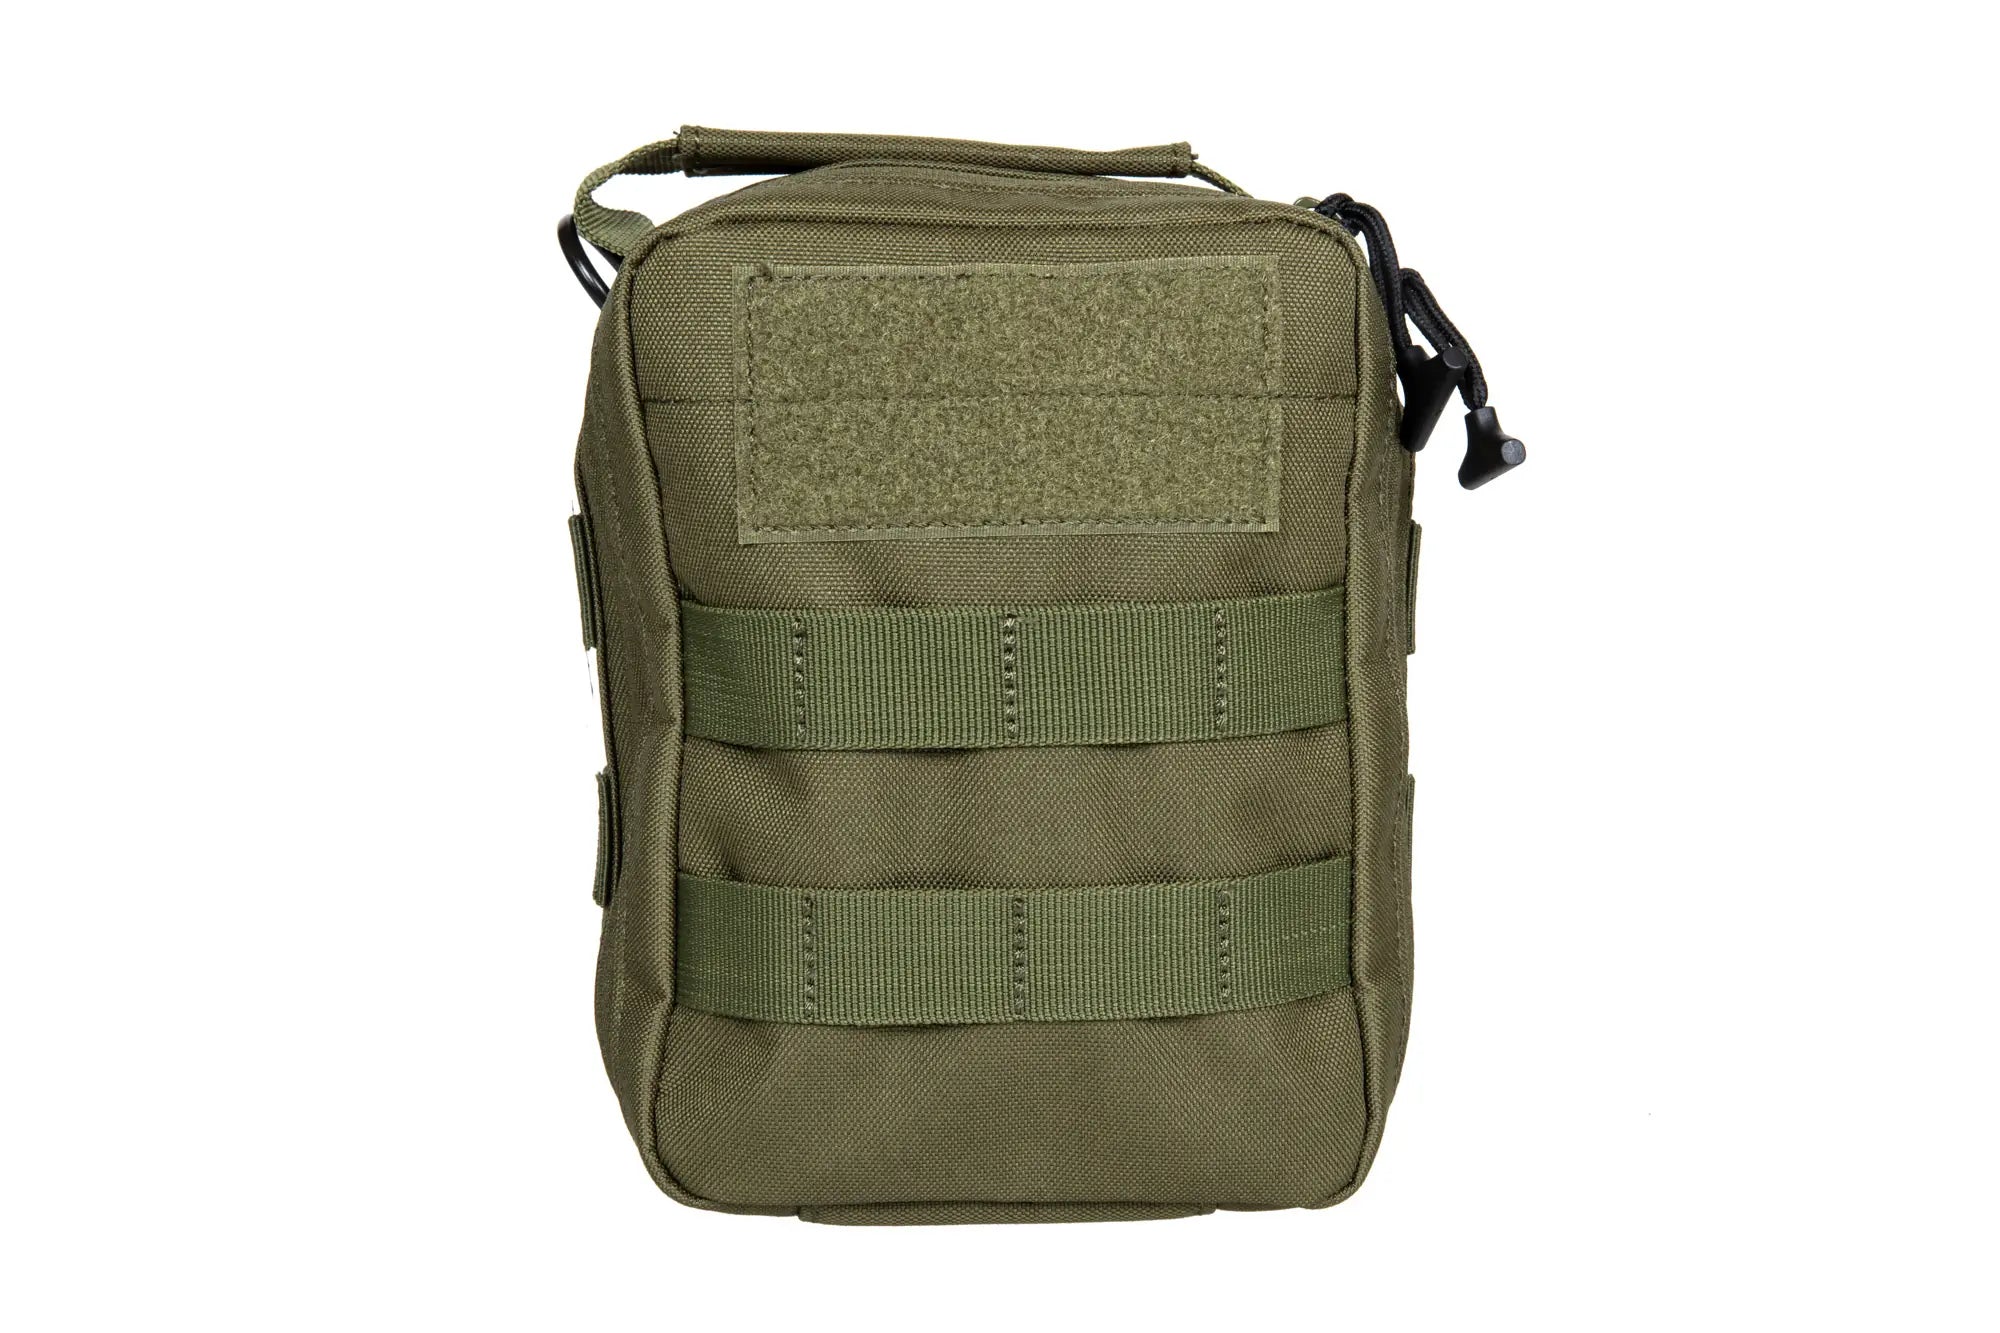 Molle pouch S18 for hearing protection - Olive-1